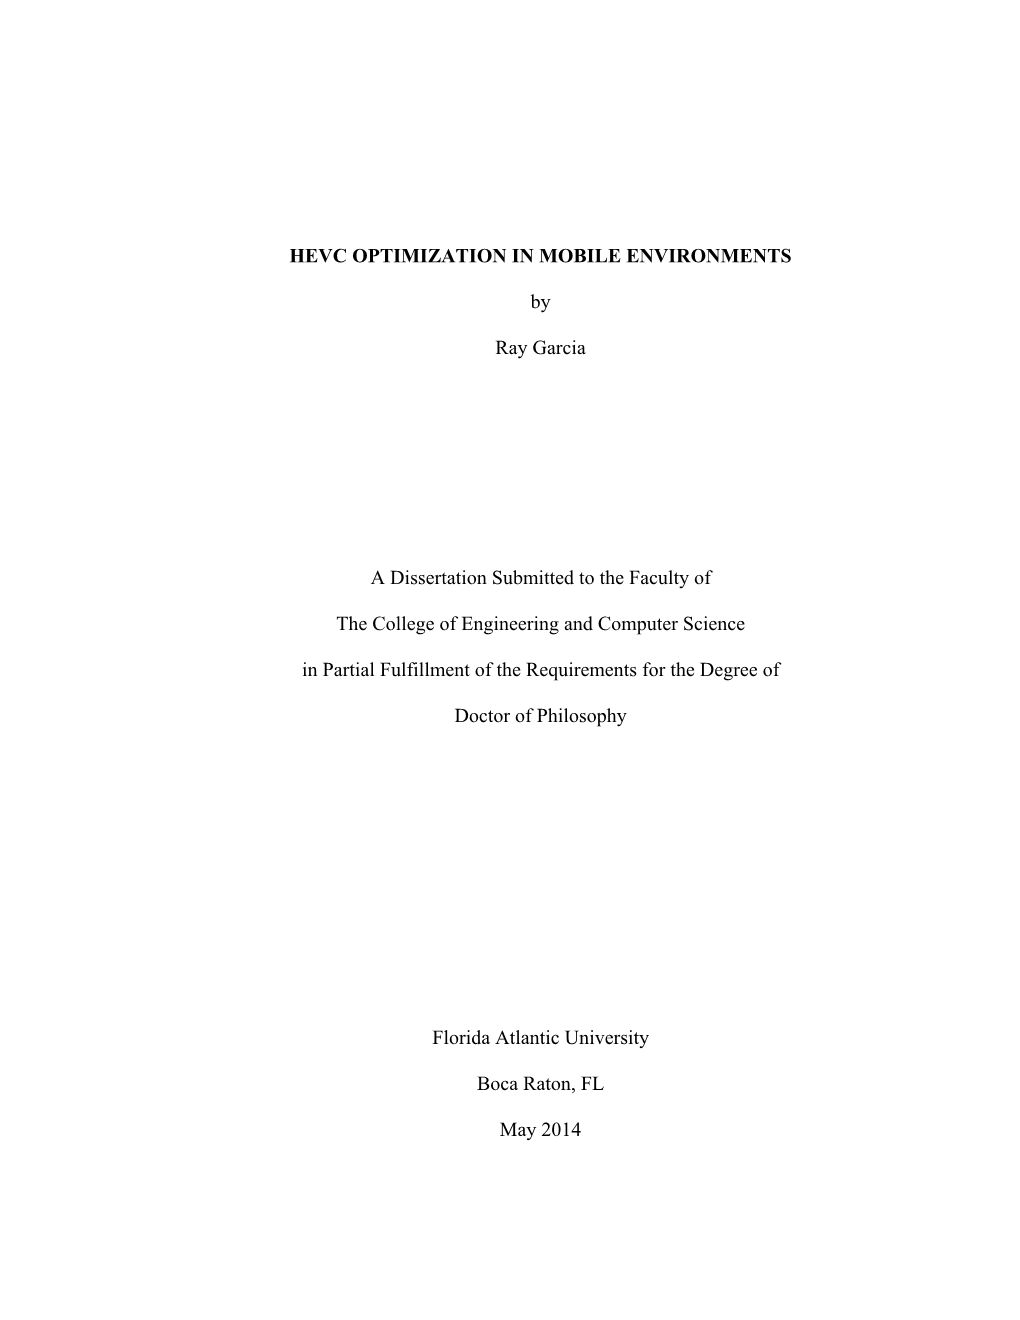 HEVC OPTIMIZATION in MOBILE ENVIRONMENTS by Ray Garcia a Dissertation Submitted to the Faculty of the College of Engineering